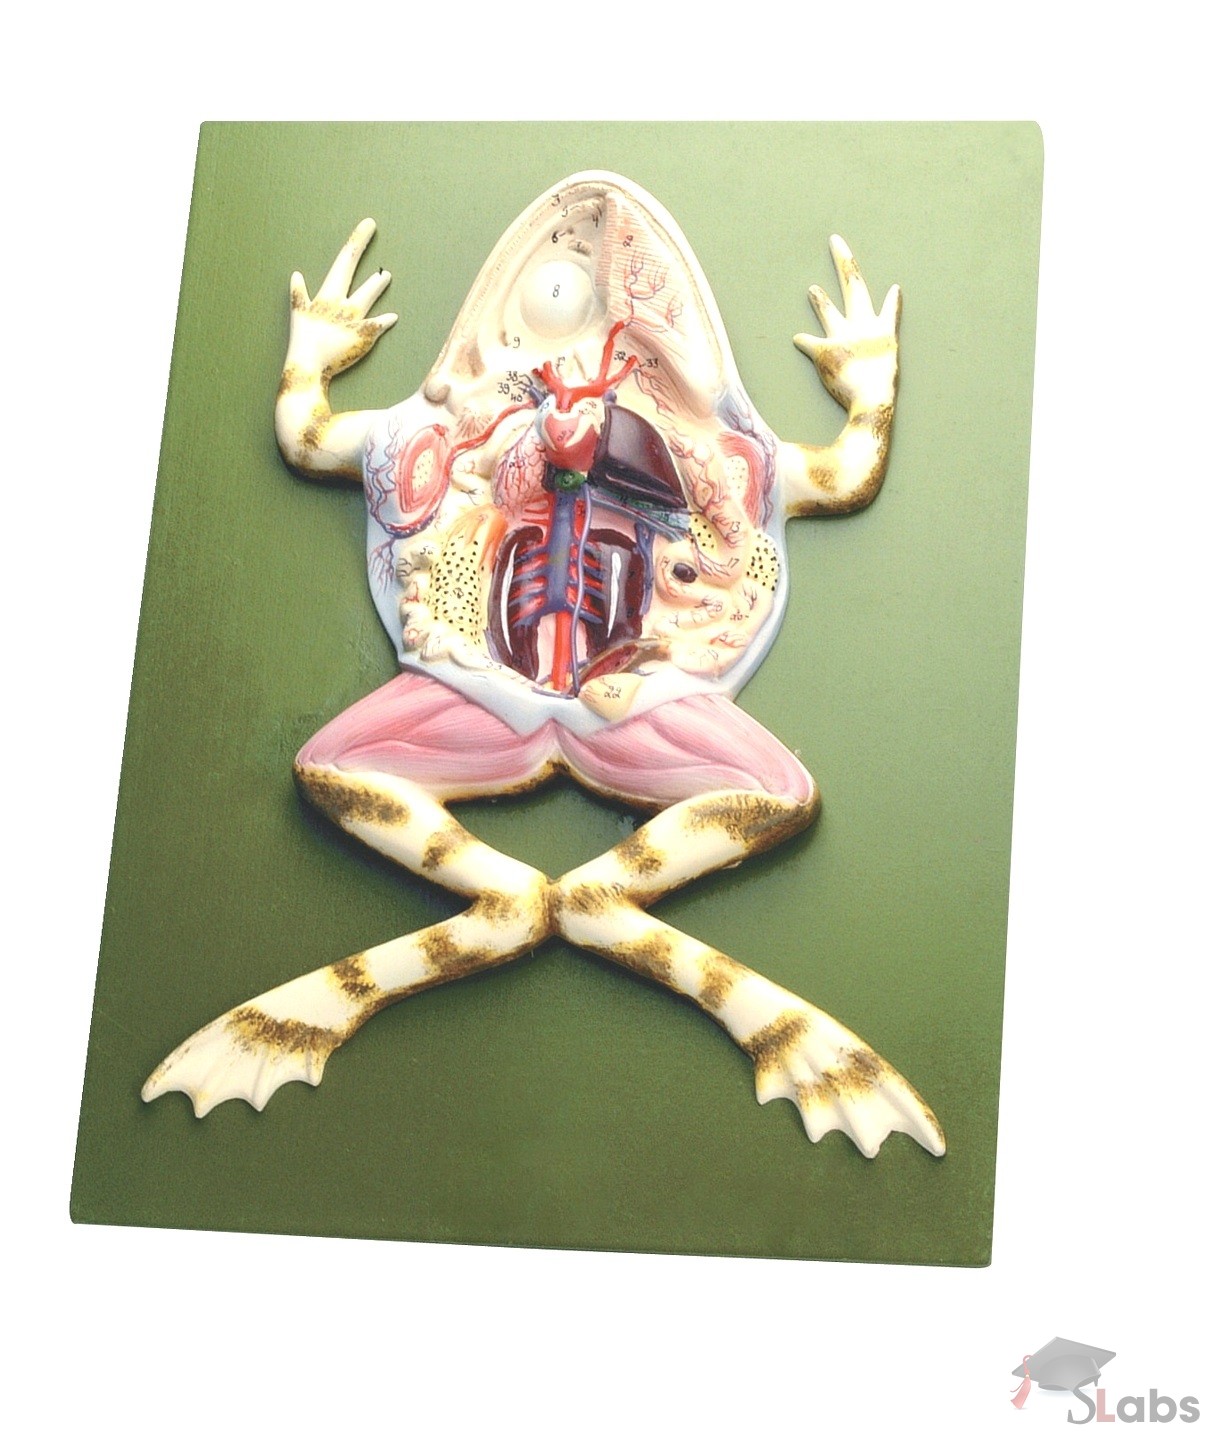 mhhe frog dissection